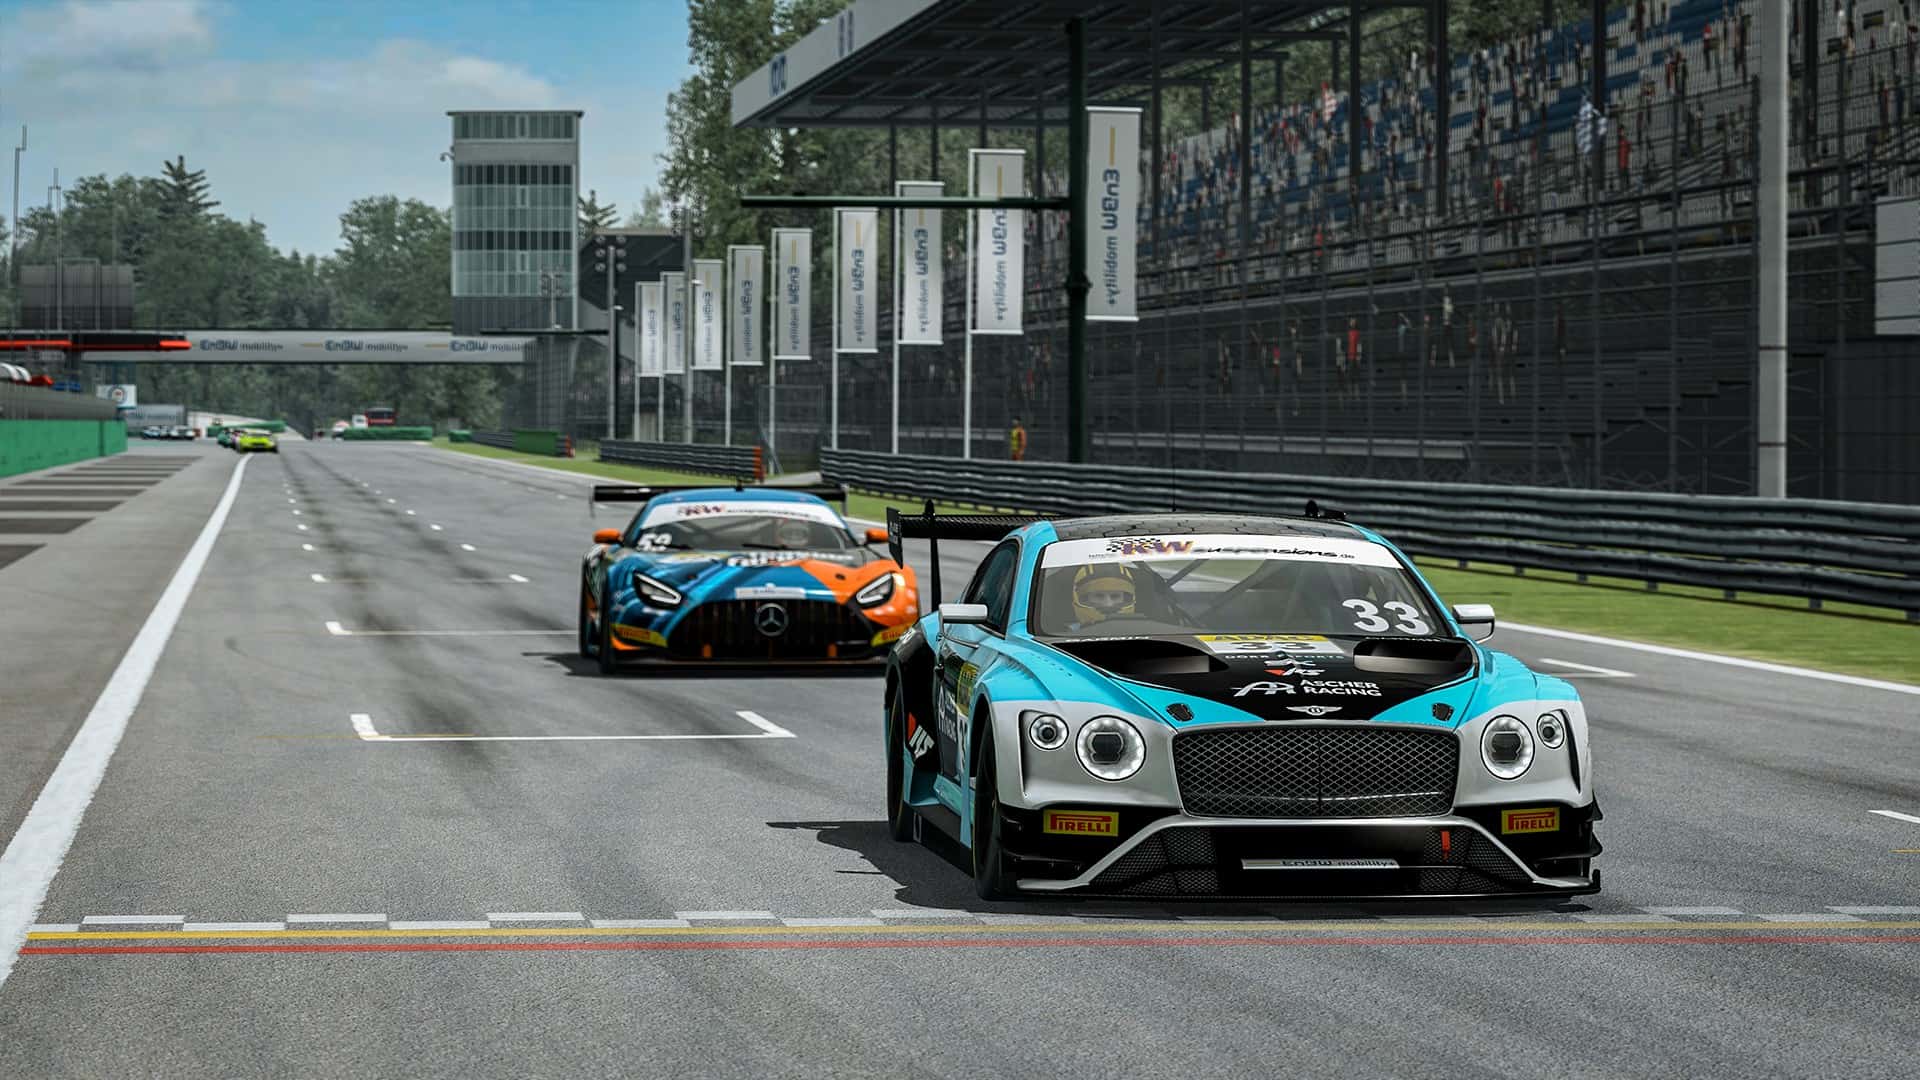 Bánki wins final two races to provisionally claim ADAC GT Masters Esports Championship